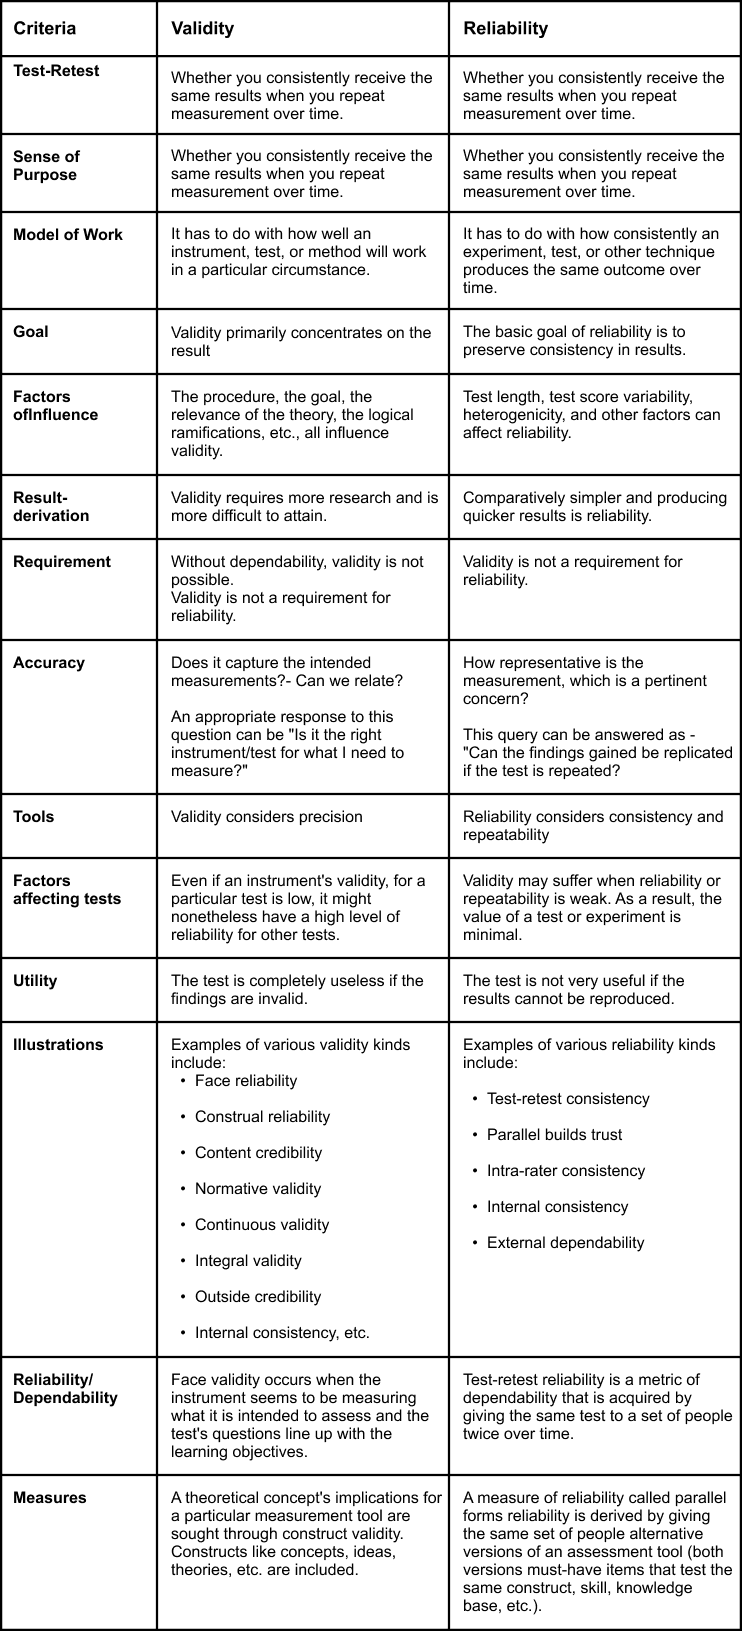 Table of Difference Between Validity and Reliability 